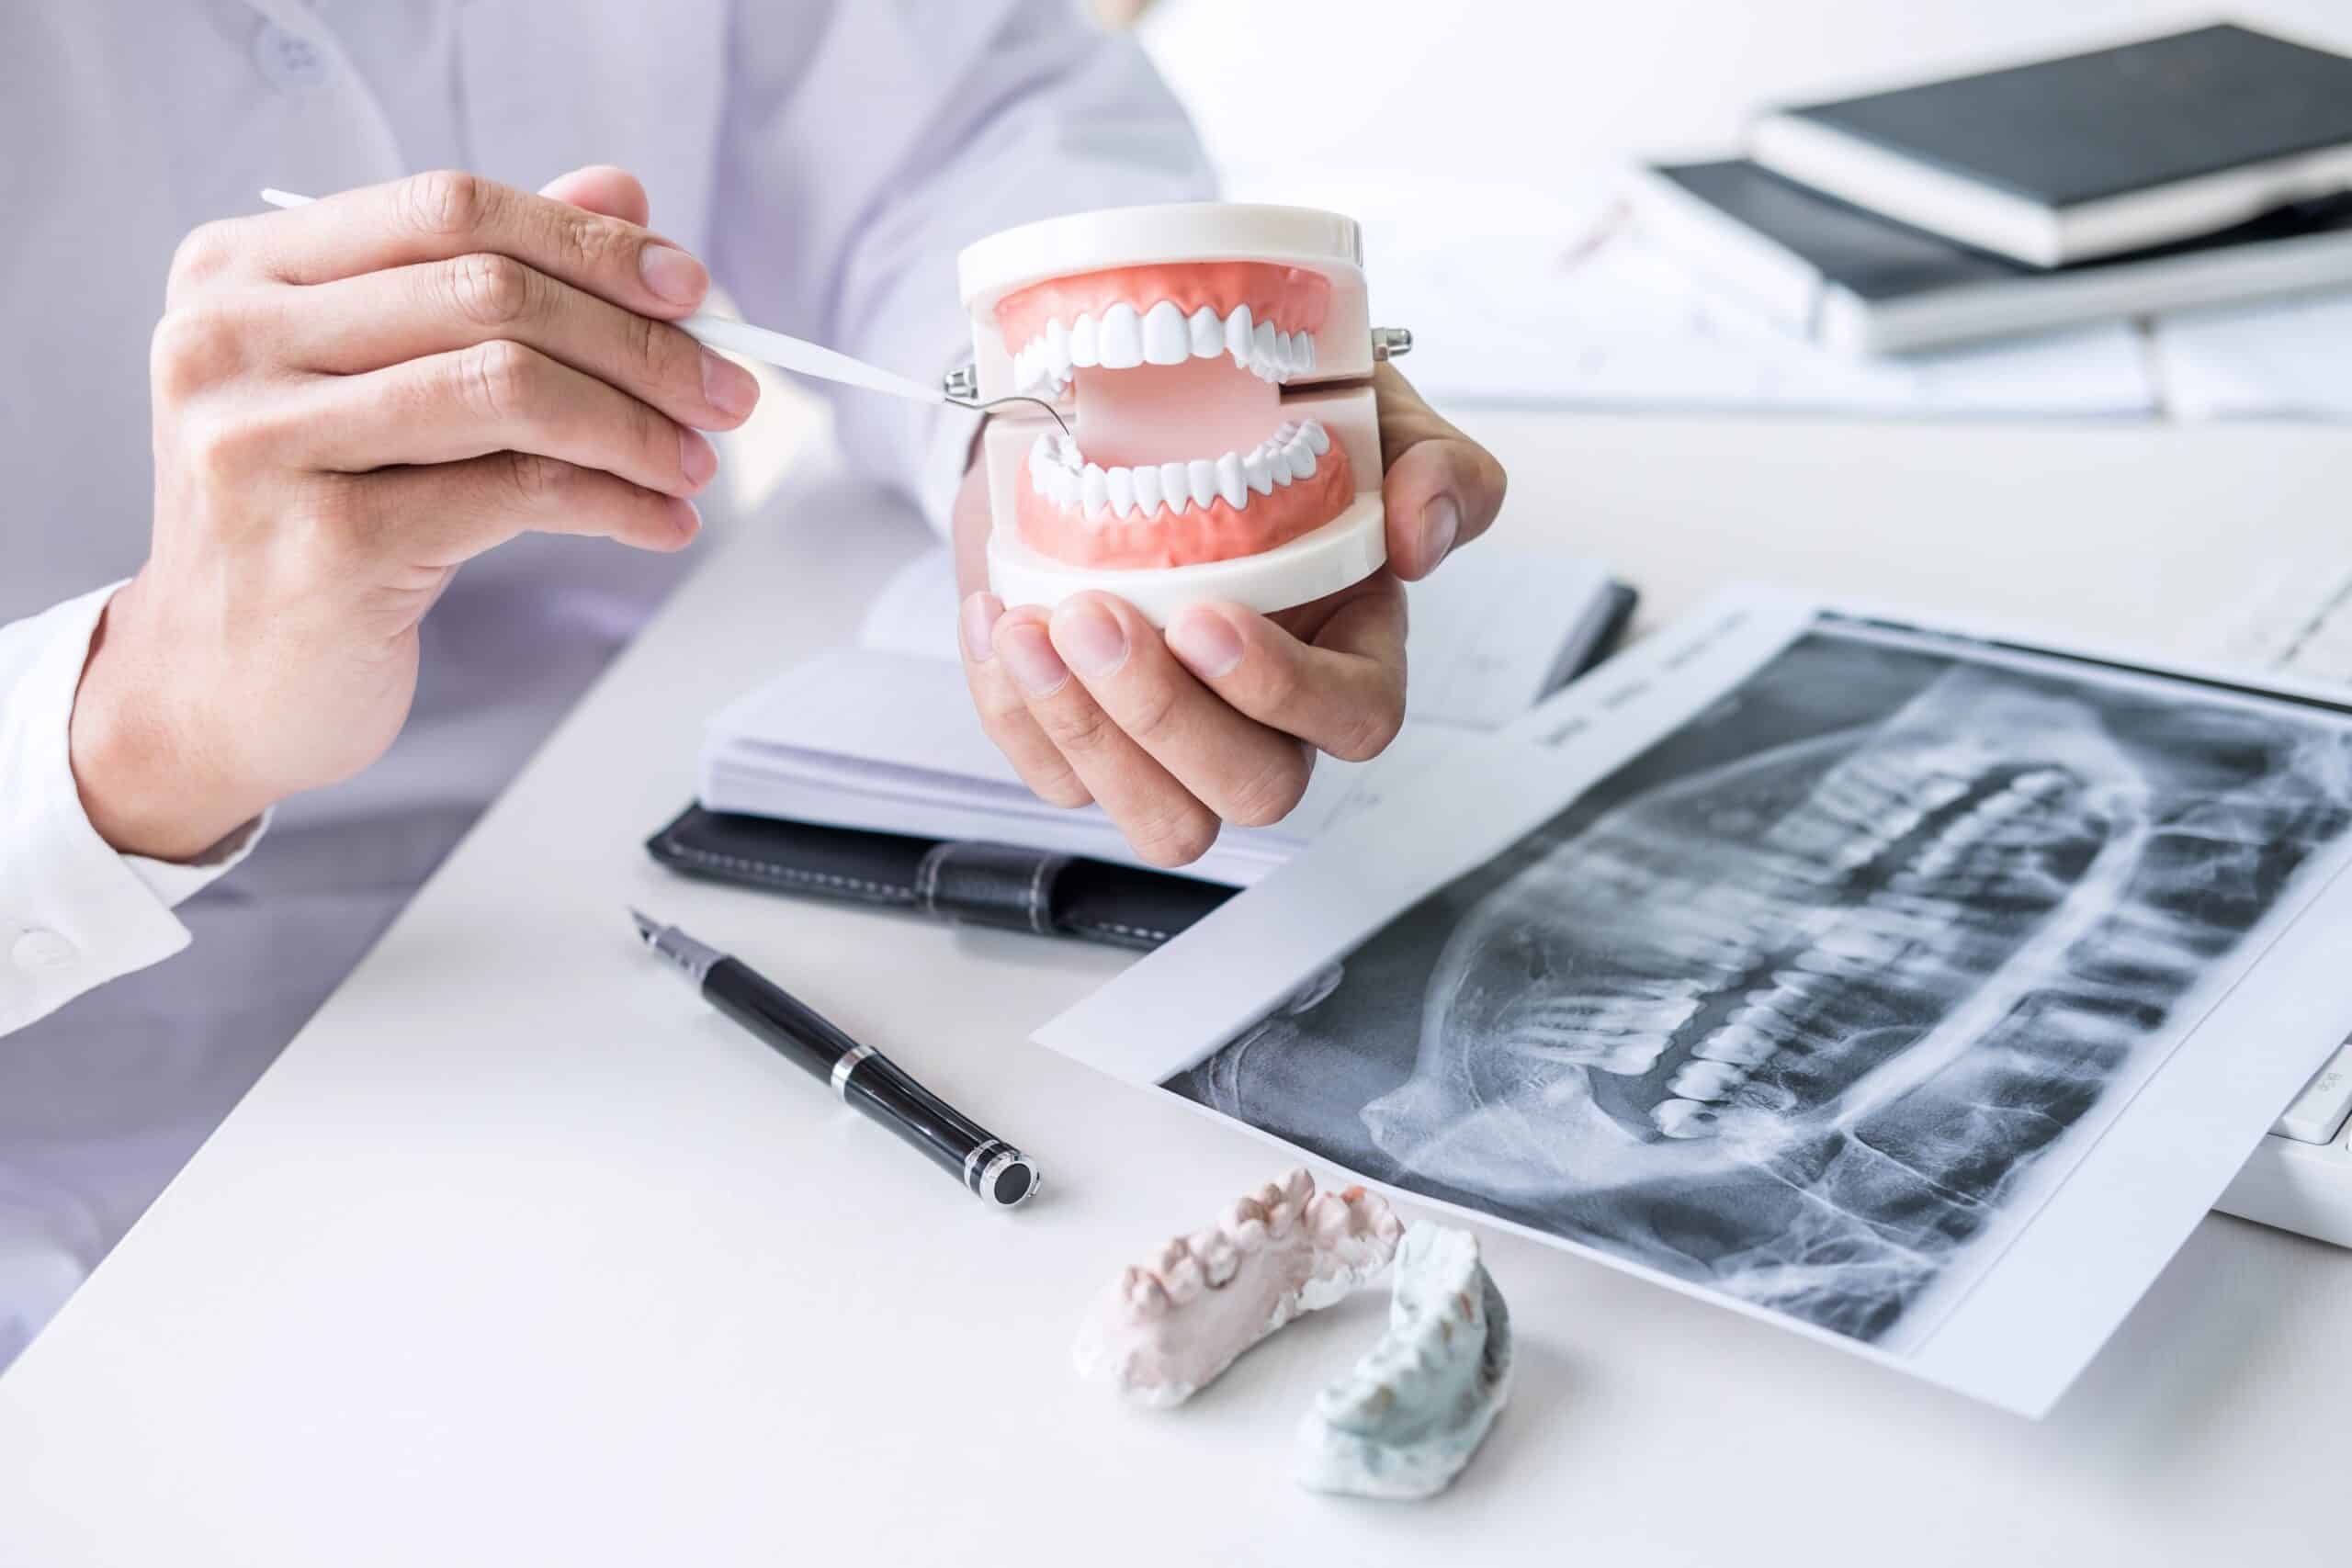 We provide a range of restorative dentistry solutions to help restore your smile and keep it healthy for years to come.